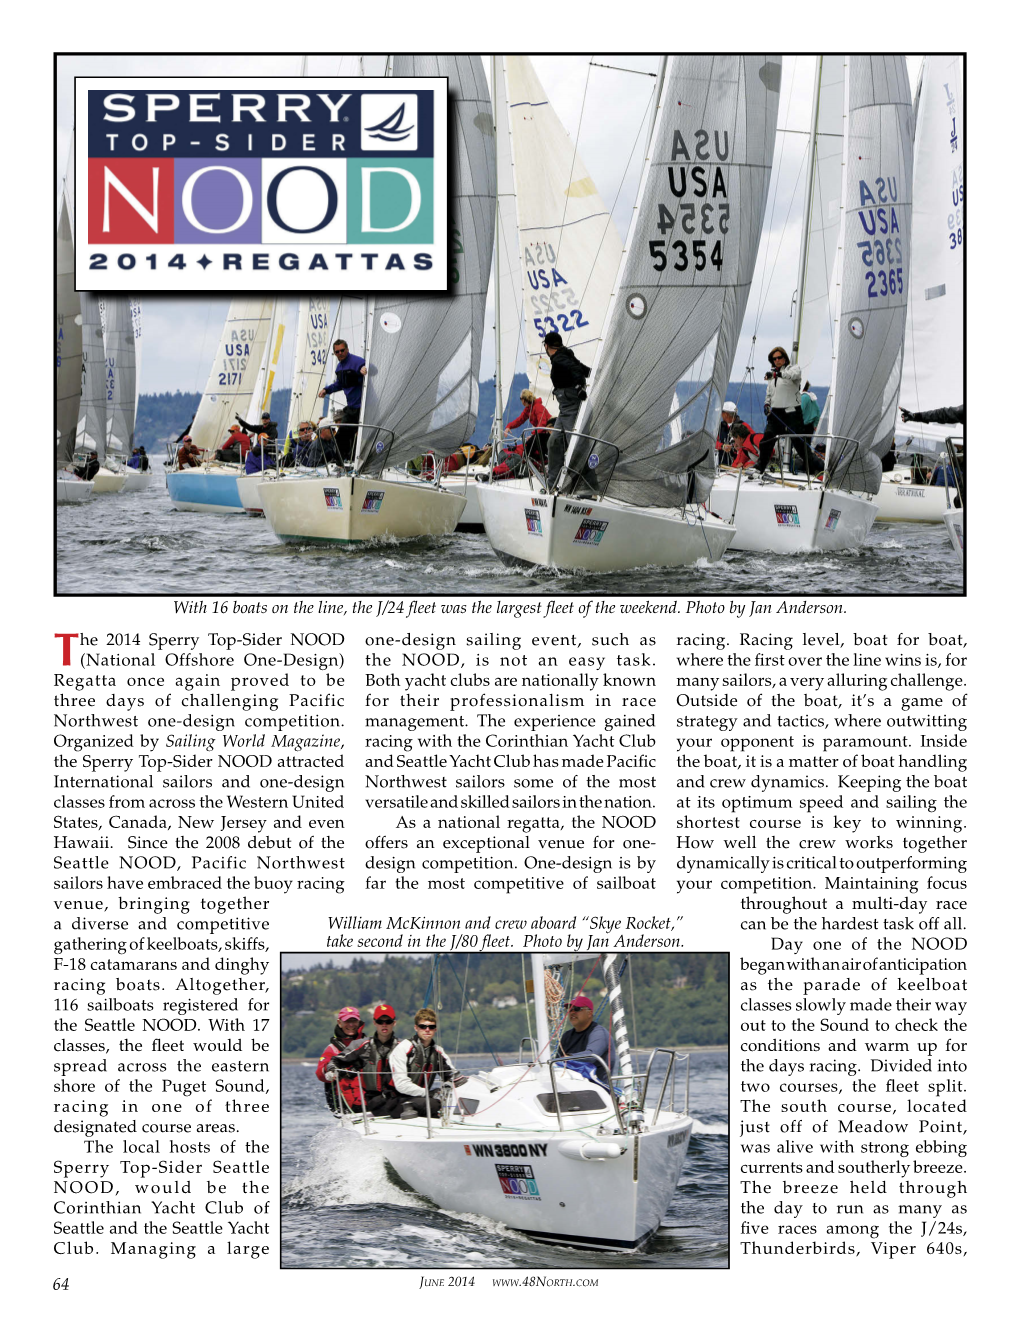 64 the 2014 Sperry Top-Sider NOOD (National Offshore One-Design